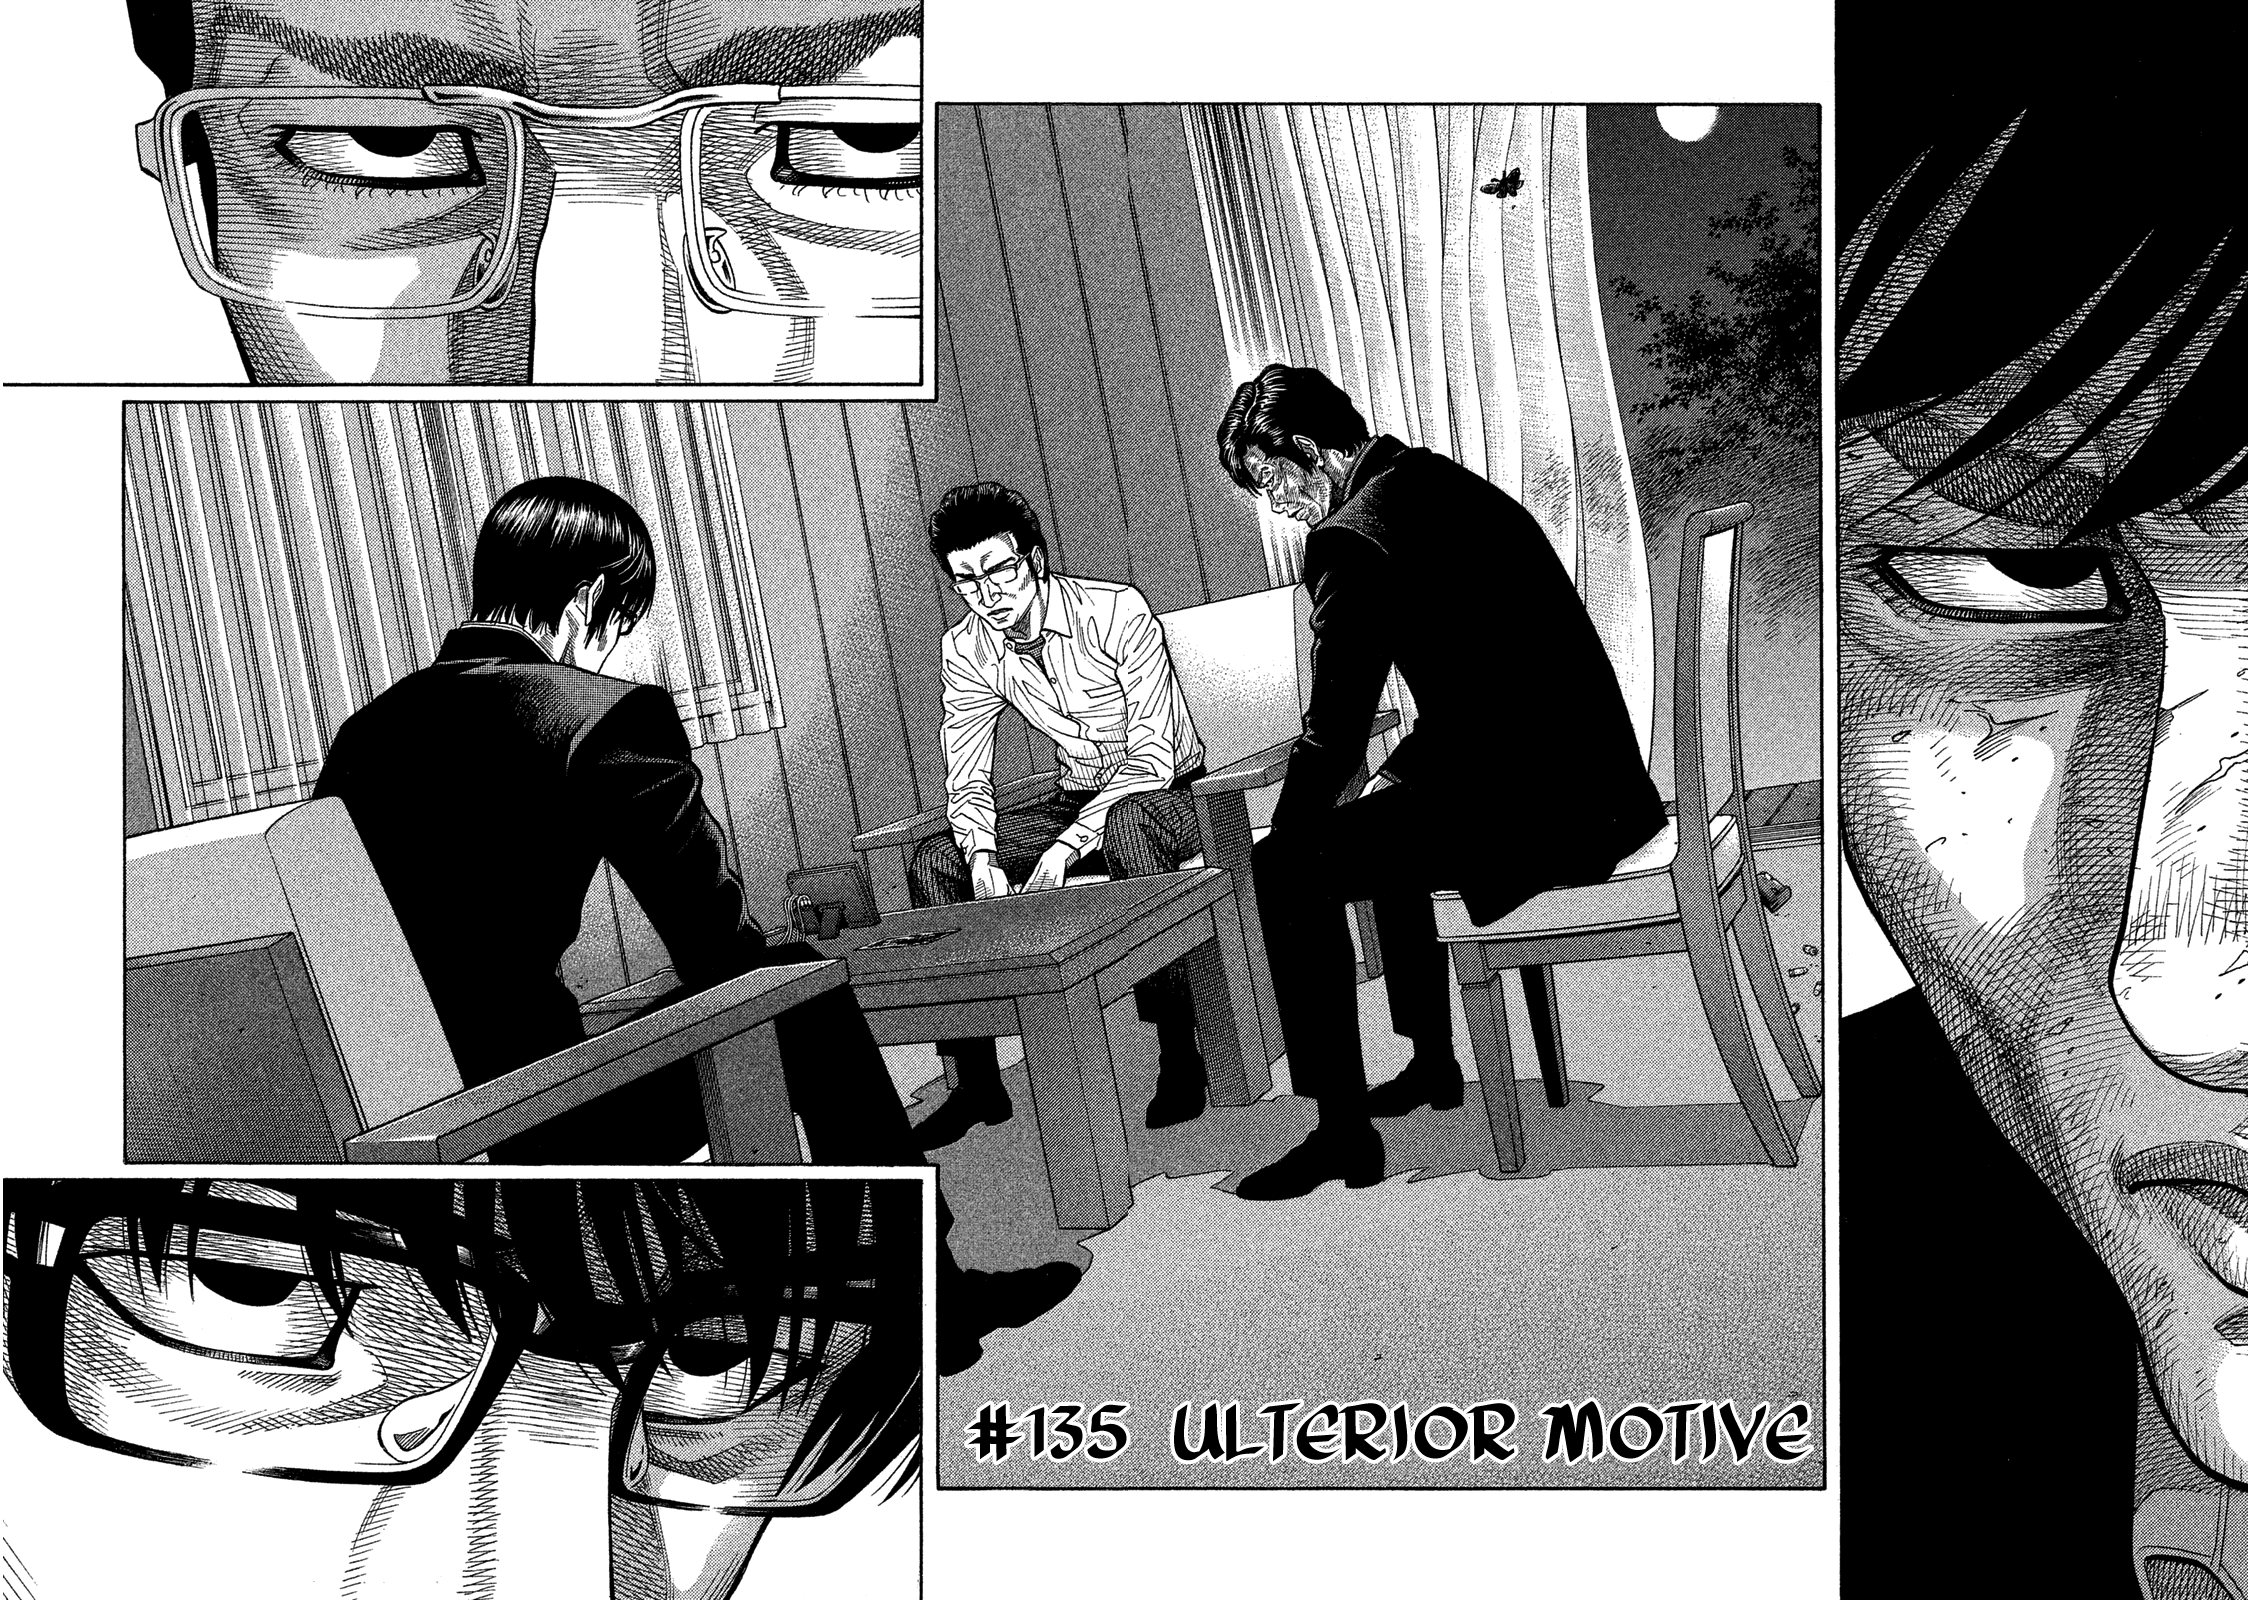 Montage (Watanabe Jun) Chapter 135: Ulterior Motive - Picture 2